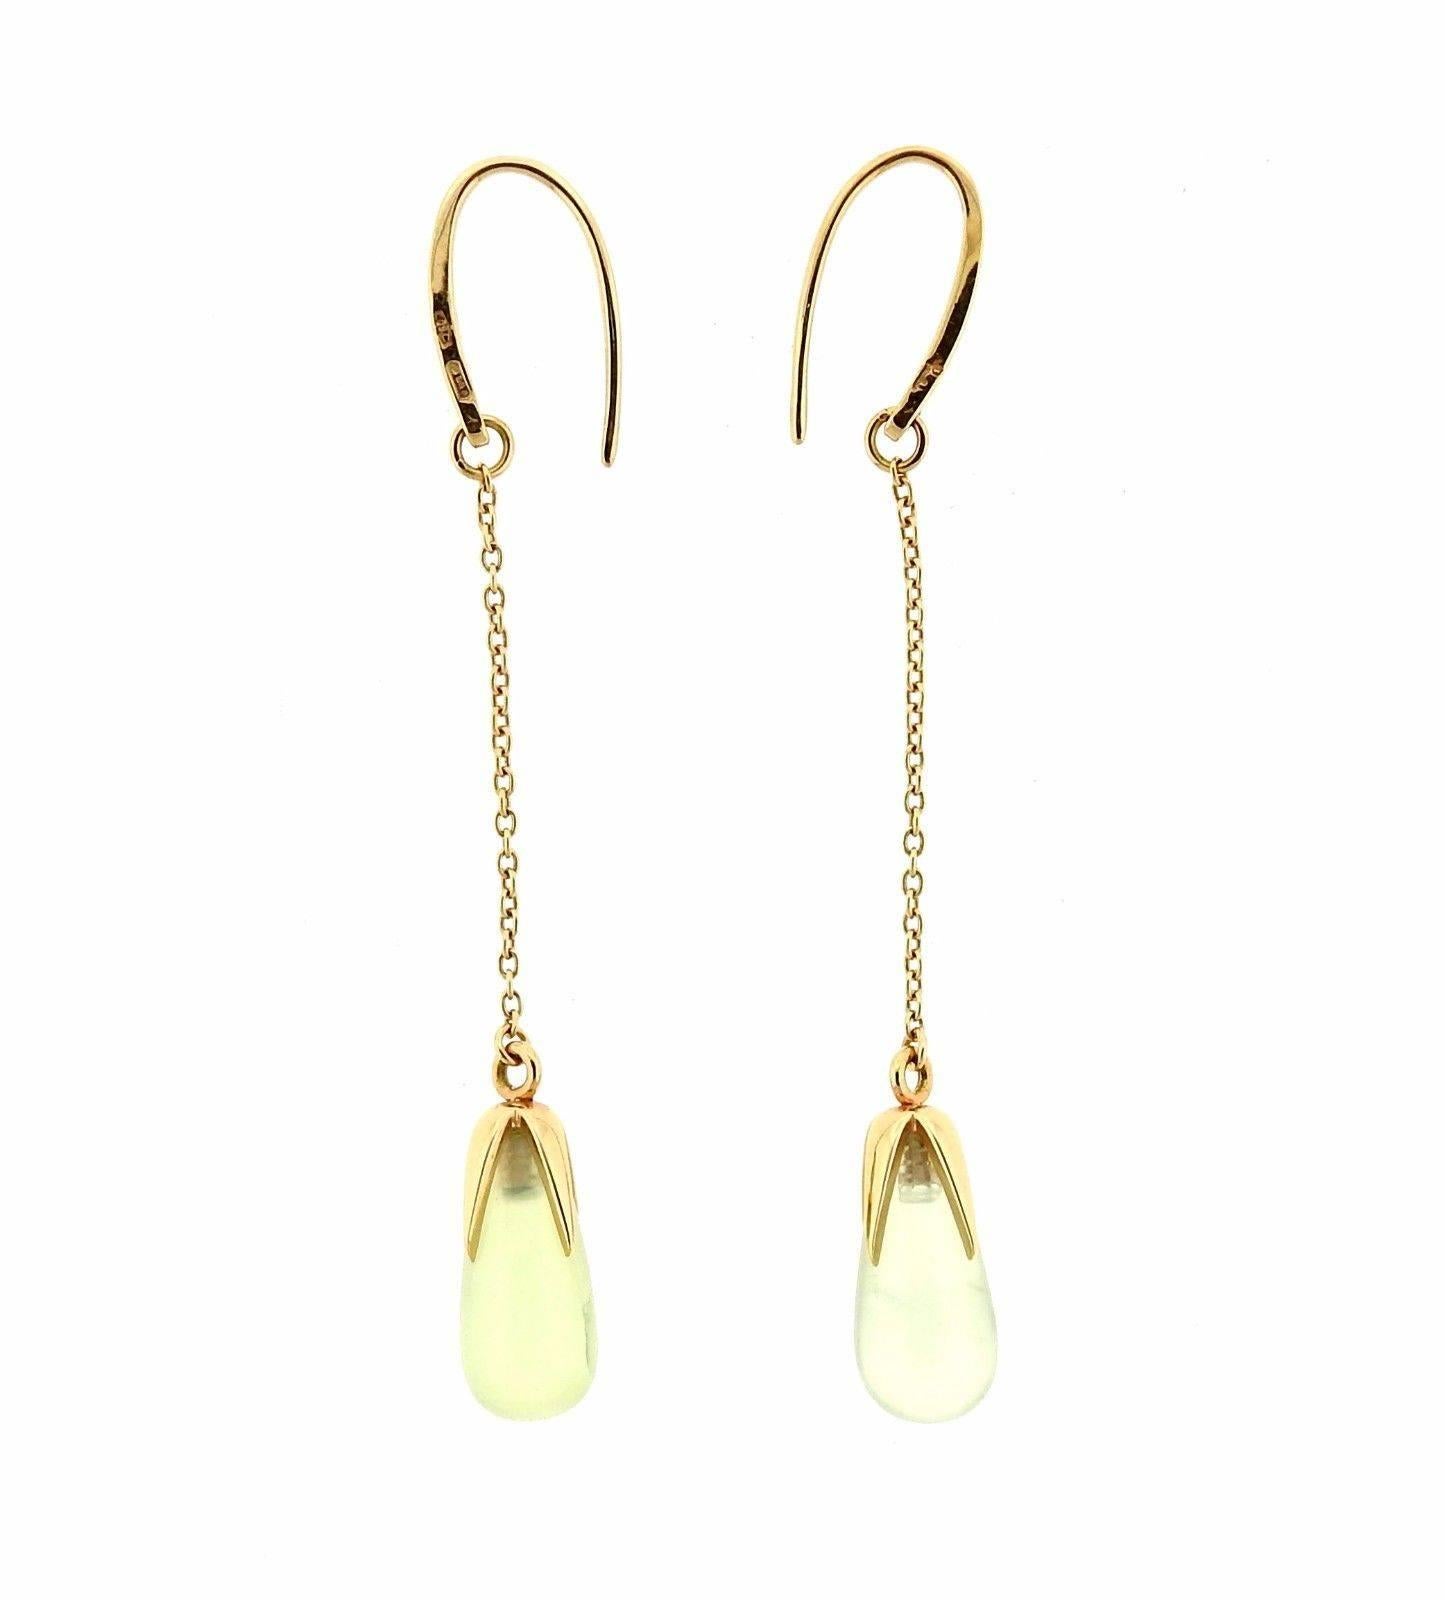 A pair of 18k yellow gold earrings set with light green quartz. Earrings are 67mm long with wire x 7.5mm wide.  The weight of the earrings is 5.7 grams. Marked: Pomellato, 750.